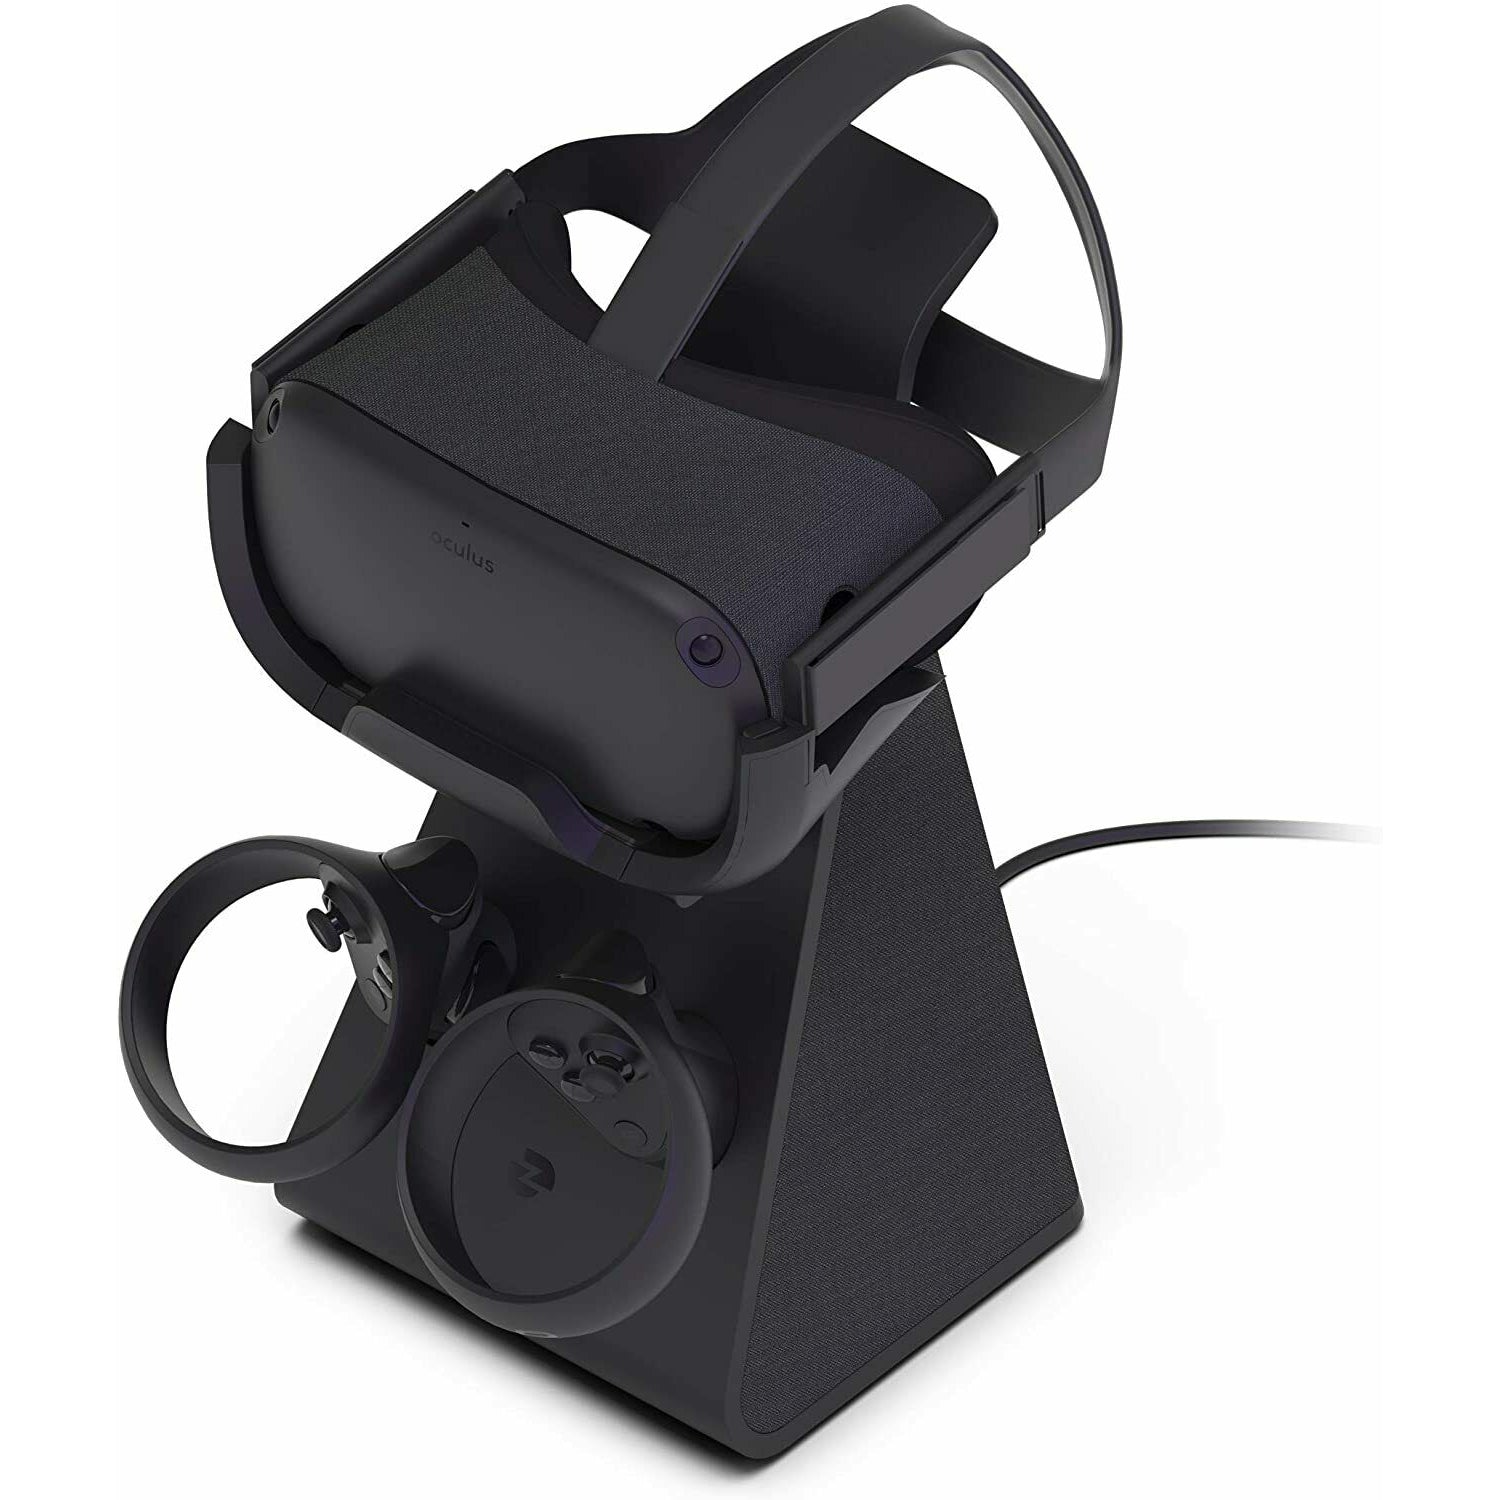 Dazed Charge Dock for Oculus Quest, DZ-OQP001-DOC, Black